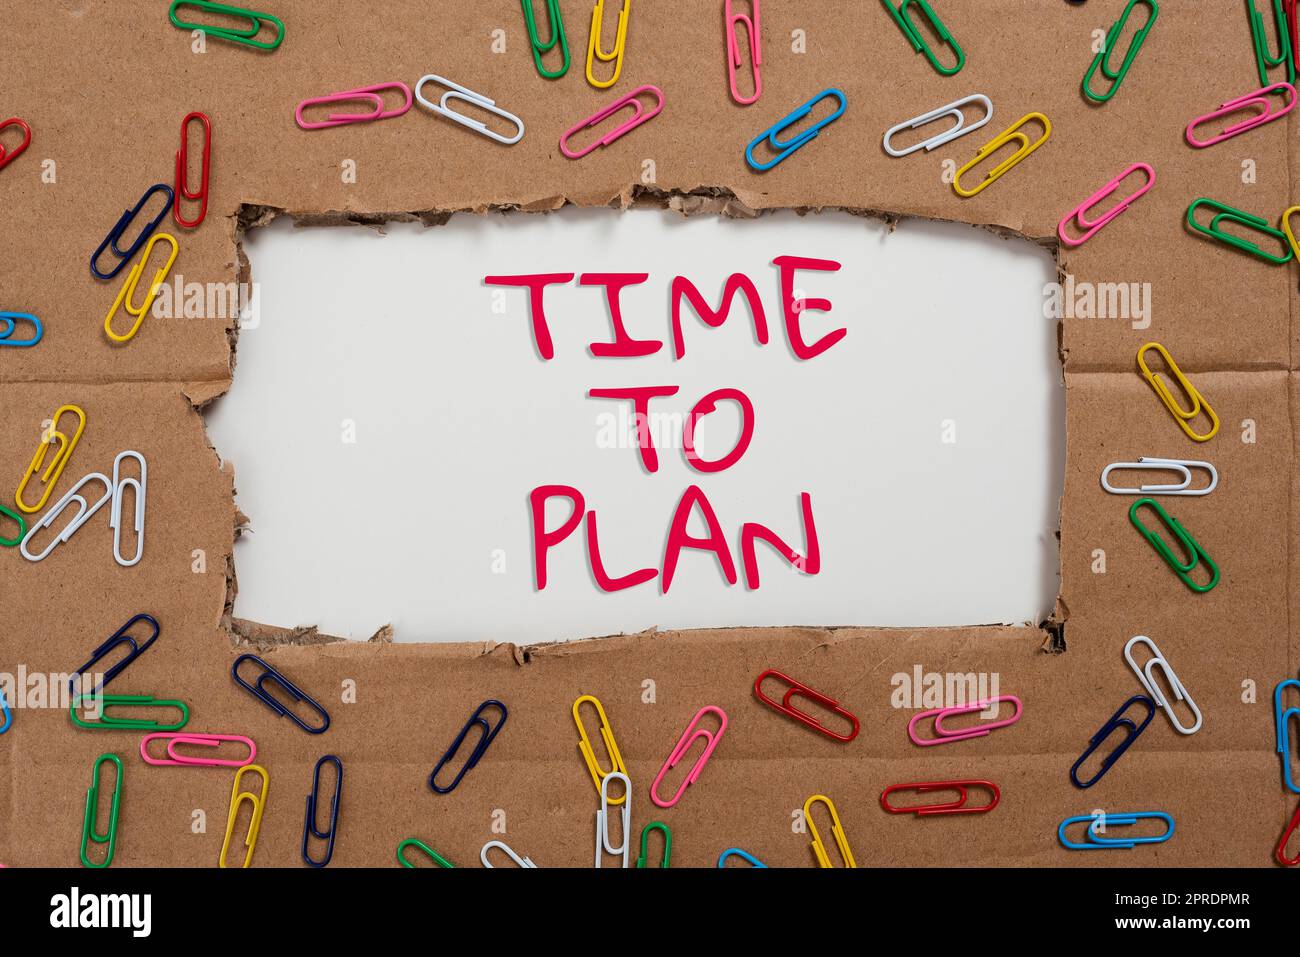 Inspiration showing sign Time To Plan. Business approach Preparation of things Getting Ready Think other solutions Important Ideas Written Under Ripped Cardboard With Paperclips Around. Stock Photo